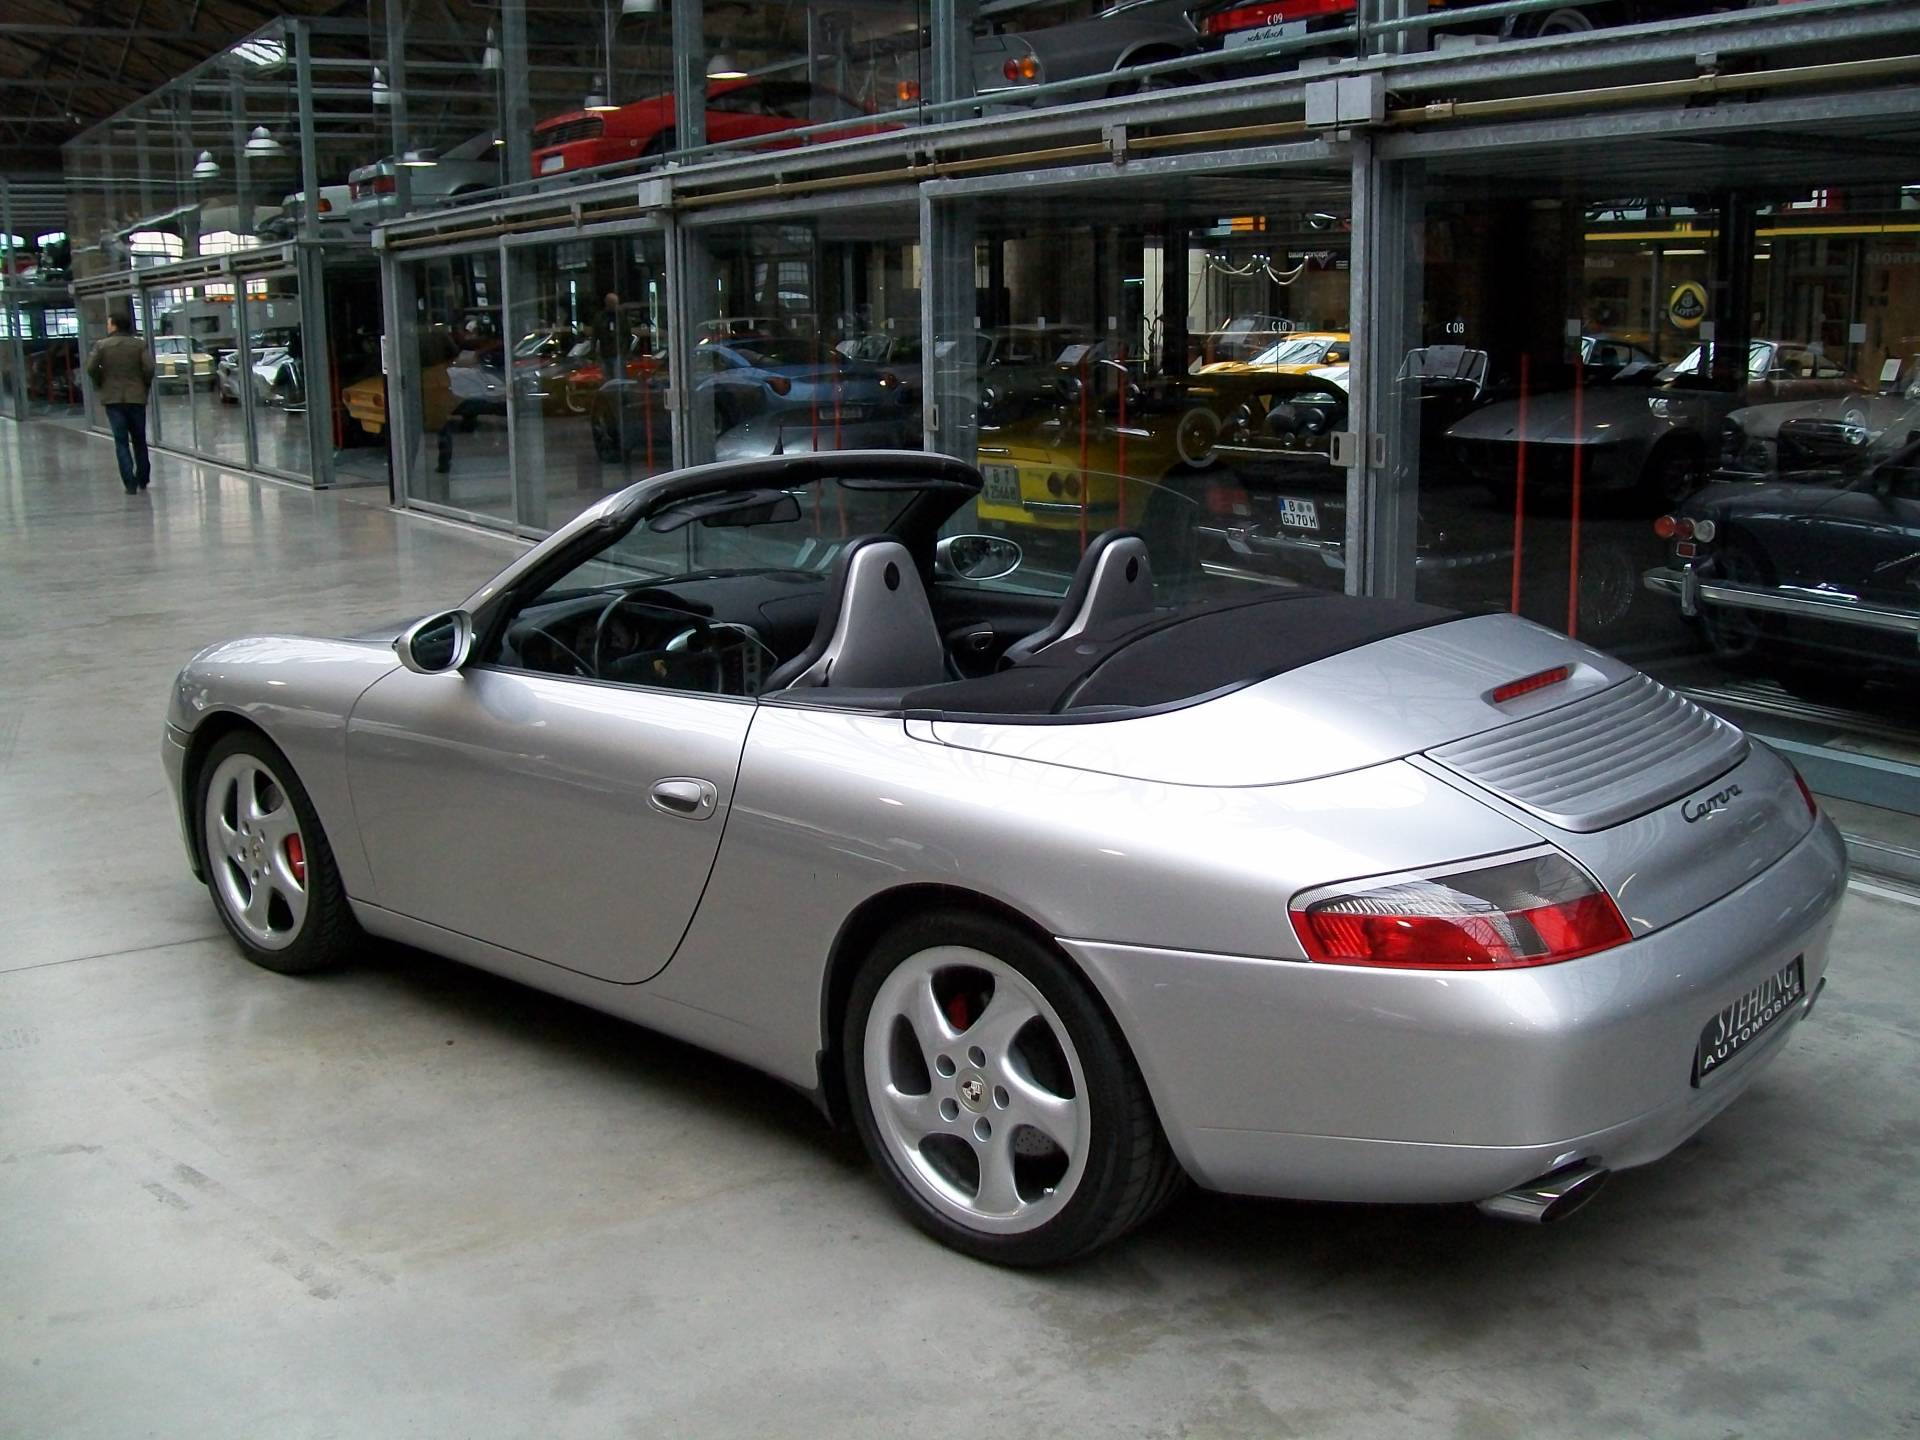 For Sale: Porsche 911 Carrera (1999) offered for GBP 34,986